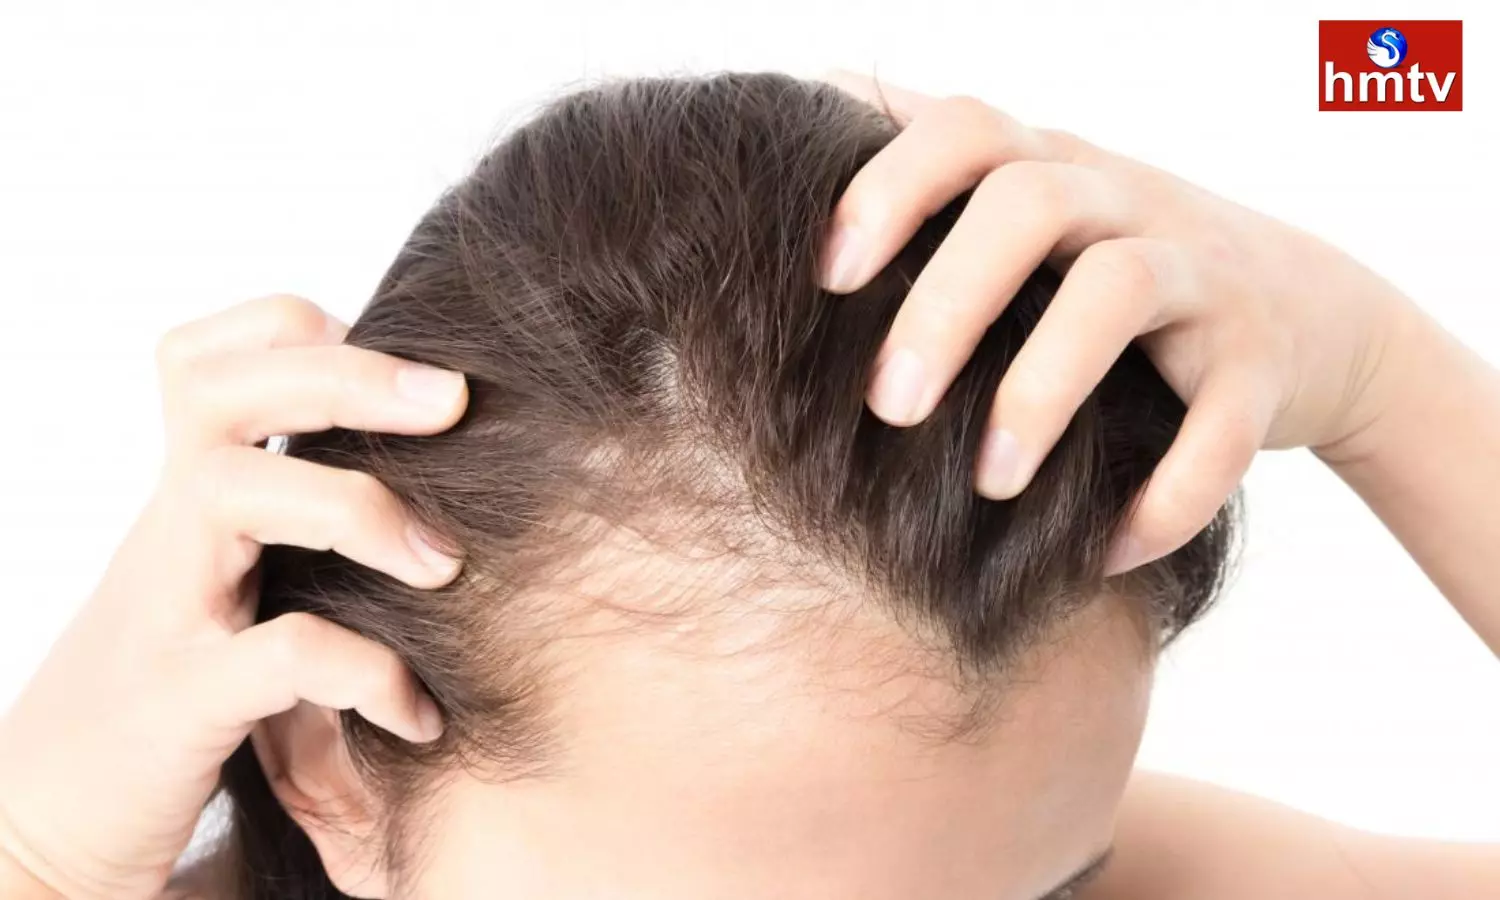 Hair Loss Causes Baldness Apply Coconut Oil Daily to Prevent it